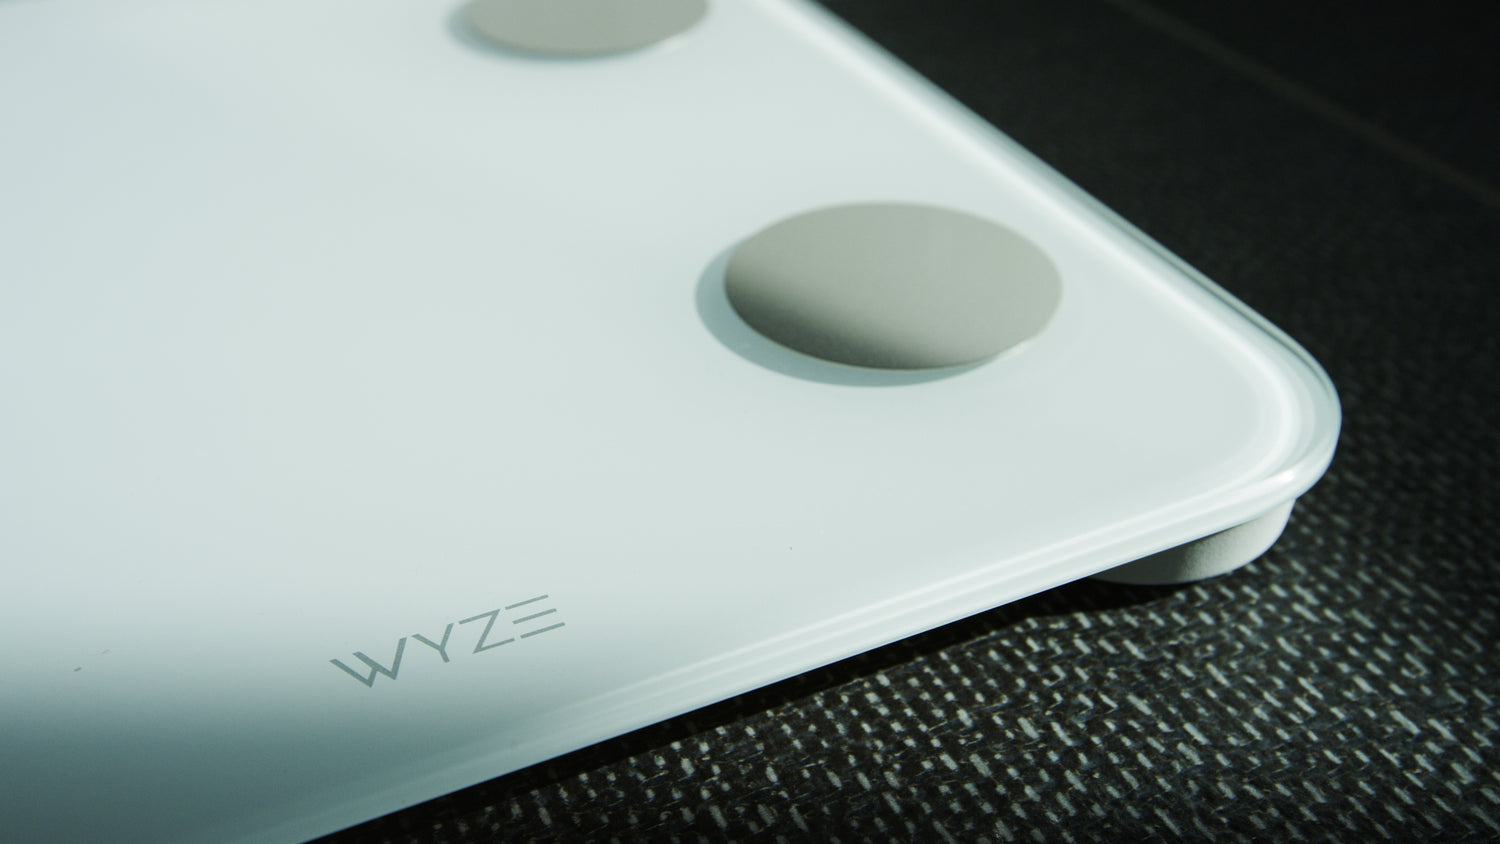 Wyze's new smart scale features modes for babies, pets, and luggage - The  Verge